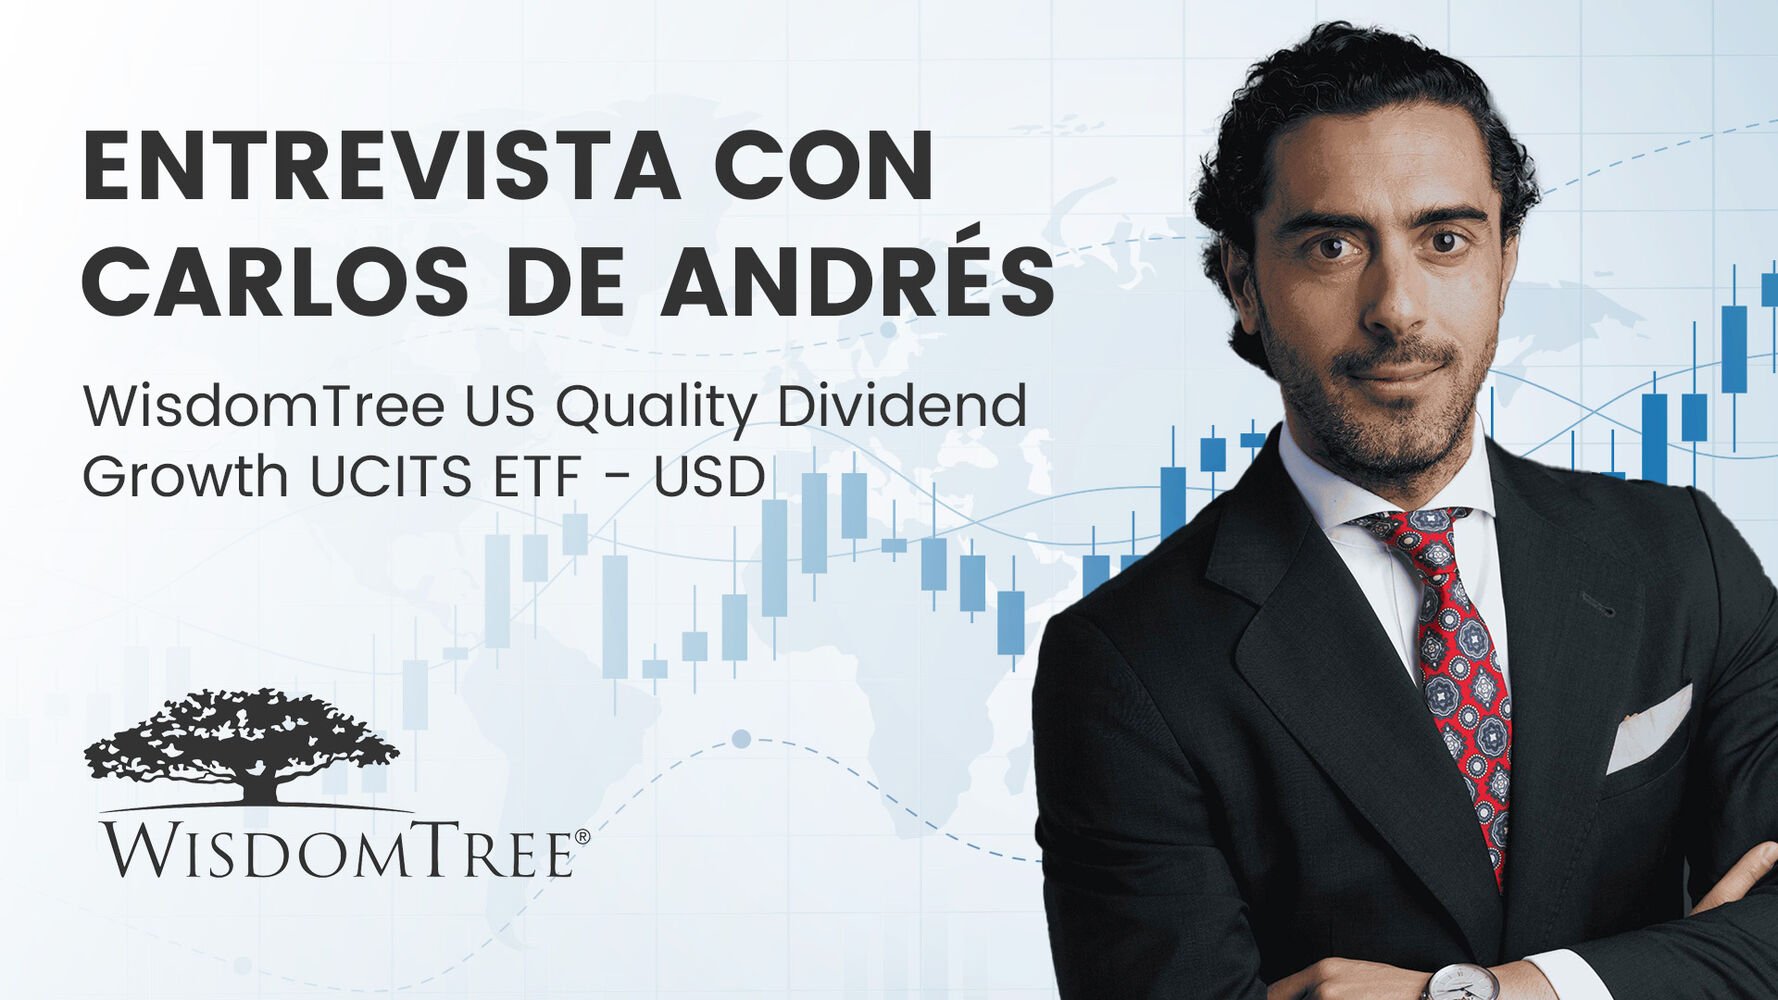 WisdomTree US Quality Dividend Growth UCITS ETF - USD